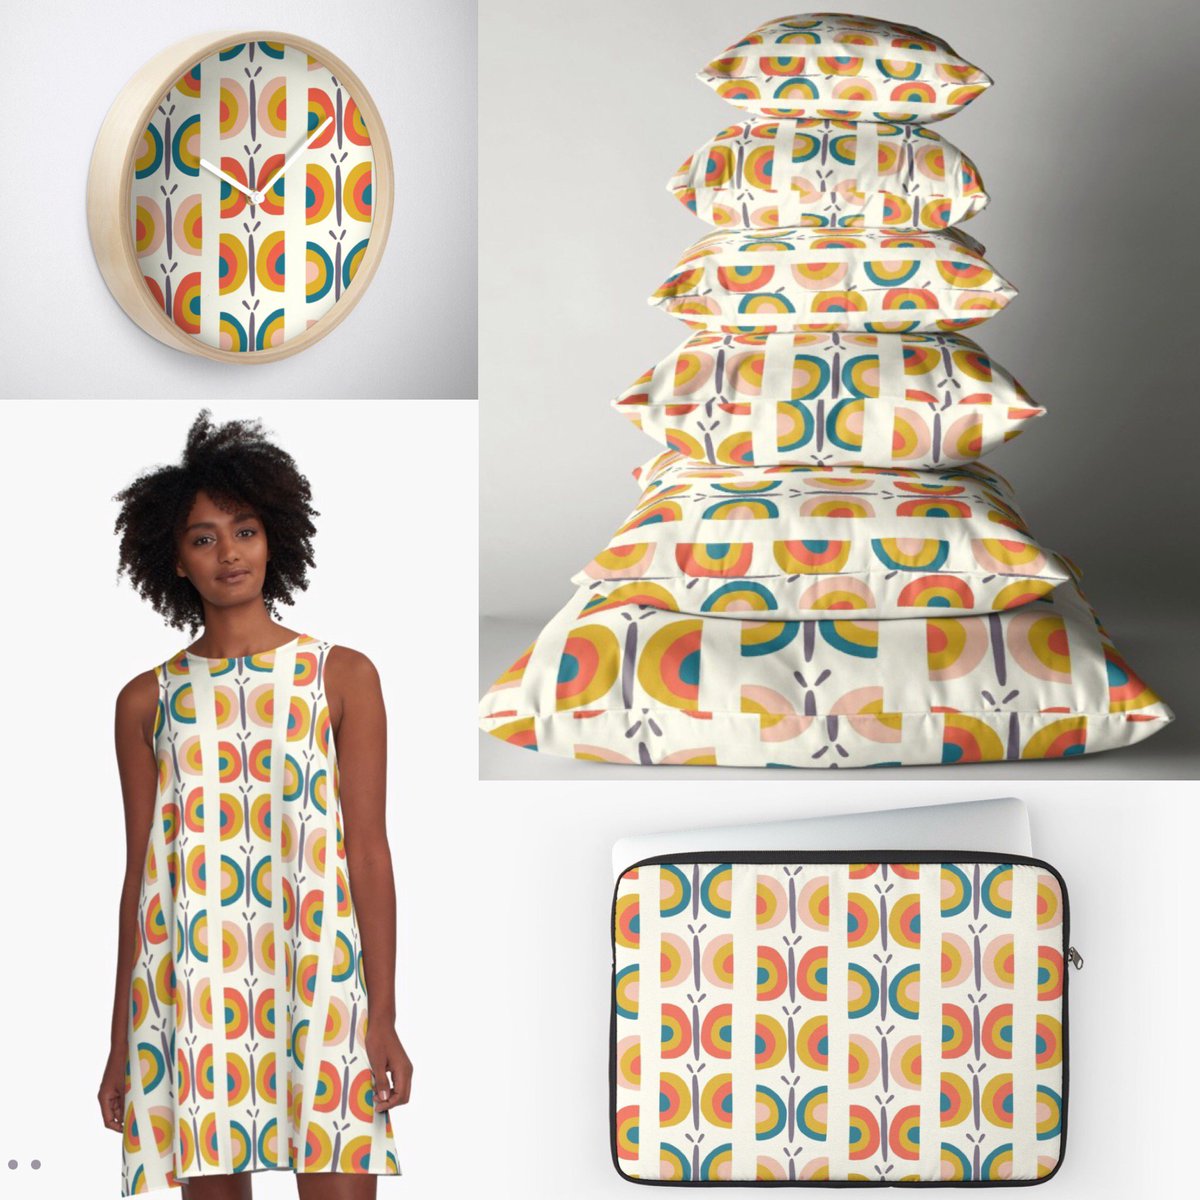 My new “Retro Butterflies” design is now available in my Redbubble shop! tinyurl.com/ychkqonh #redbubble #pattern #patterndesign #redbubbleshop #dress #butterfly #butterflies #butterflydress #retro #vintage #wallclock #pillow #butterflypillow #laptopsleeve #cute #kids #fabric